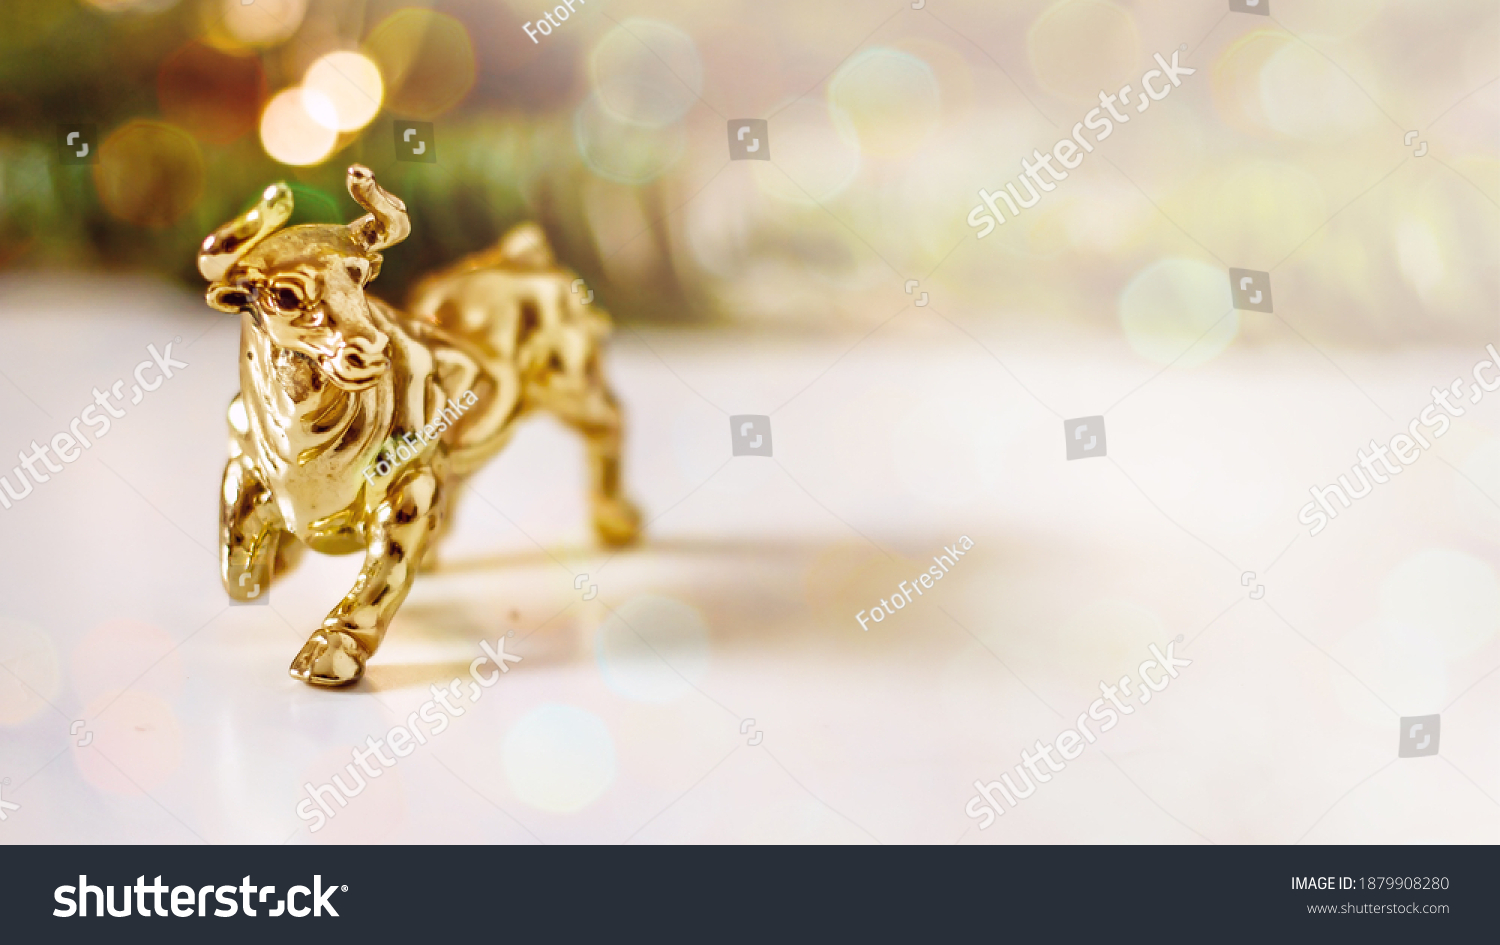 Golden calf, golden bull.Chinese new year of the bull. Year of the bull according to the Chinese calendar 2021. Souvenir bull made of gold metal on a background of fir branches with bokeh effect #1879908280